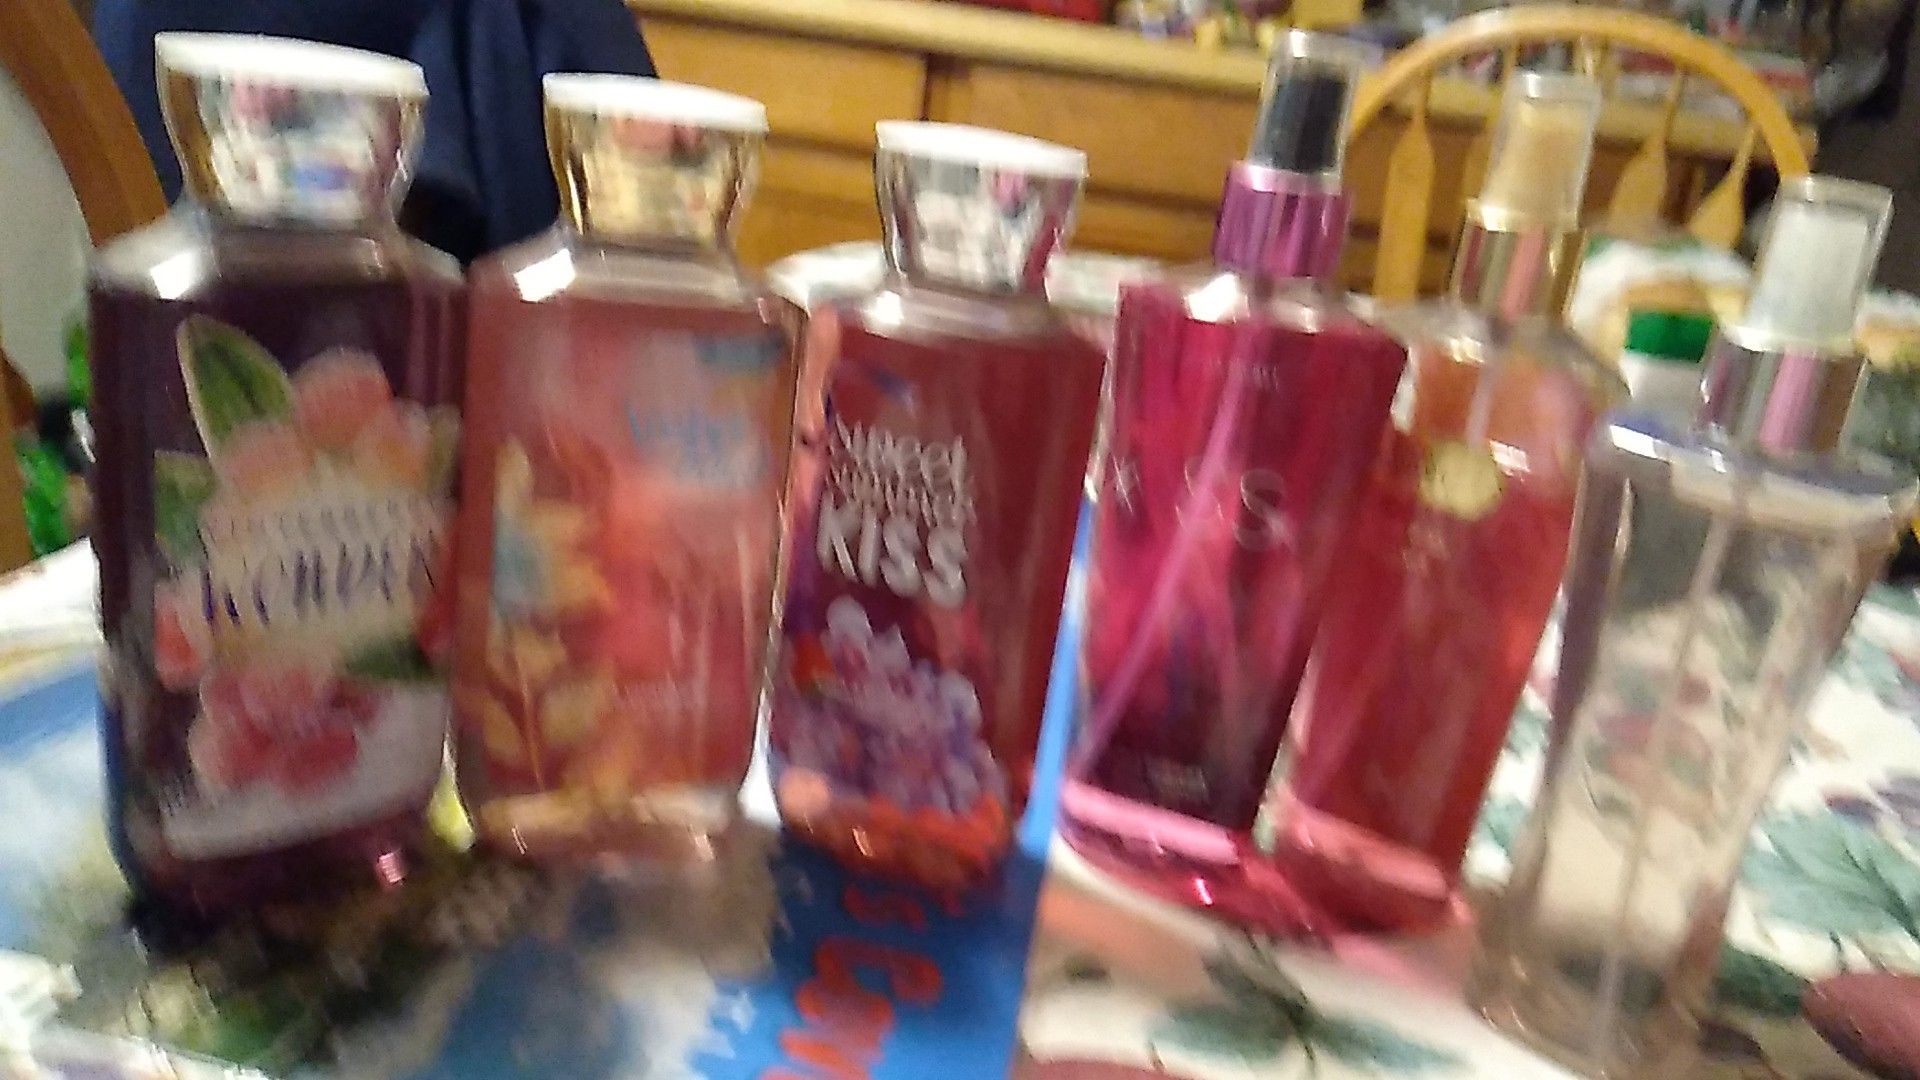 Bath & Body works shower gel and perfume. 5 bottles for $15